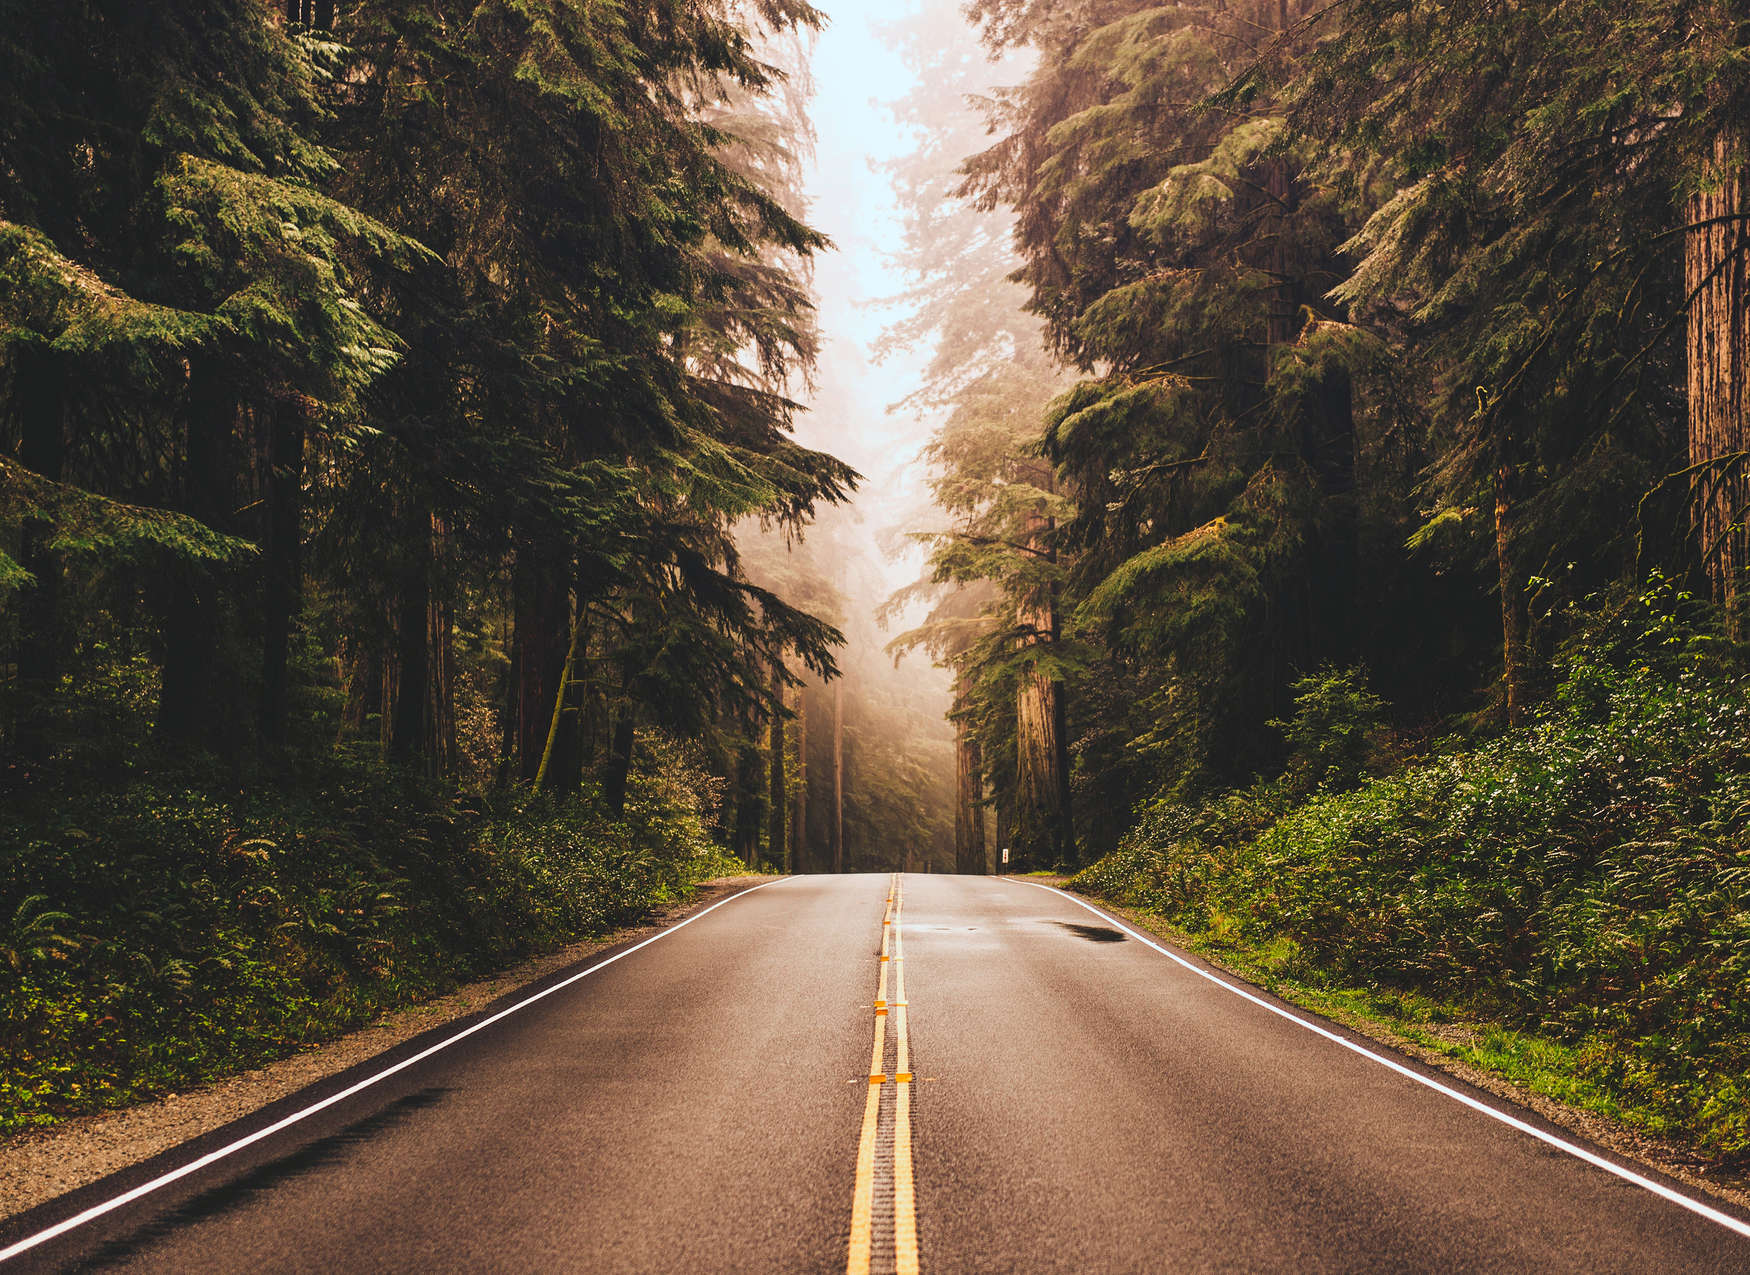             Photo wallpaper American Highway in the forest - brown, green, grey
        